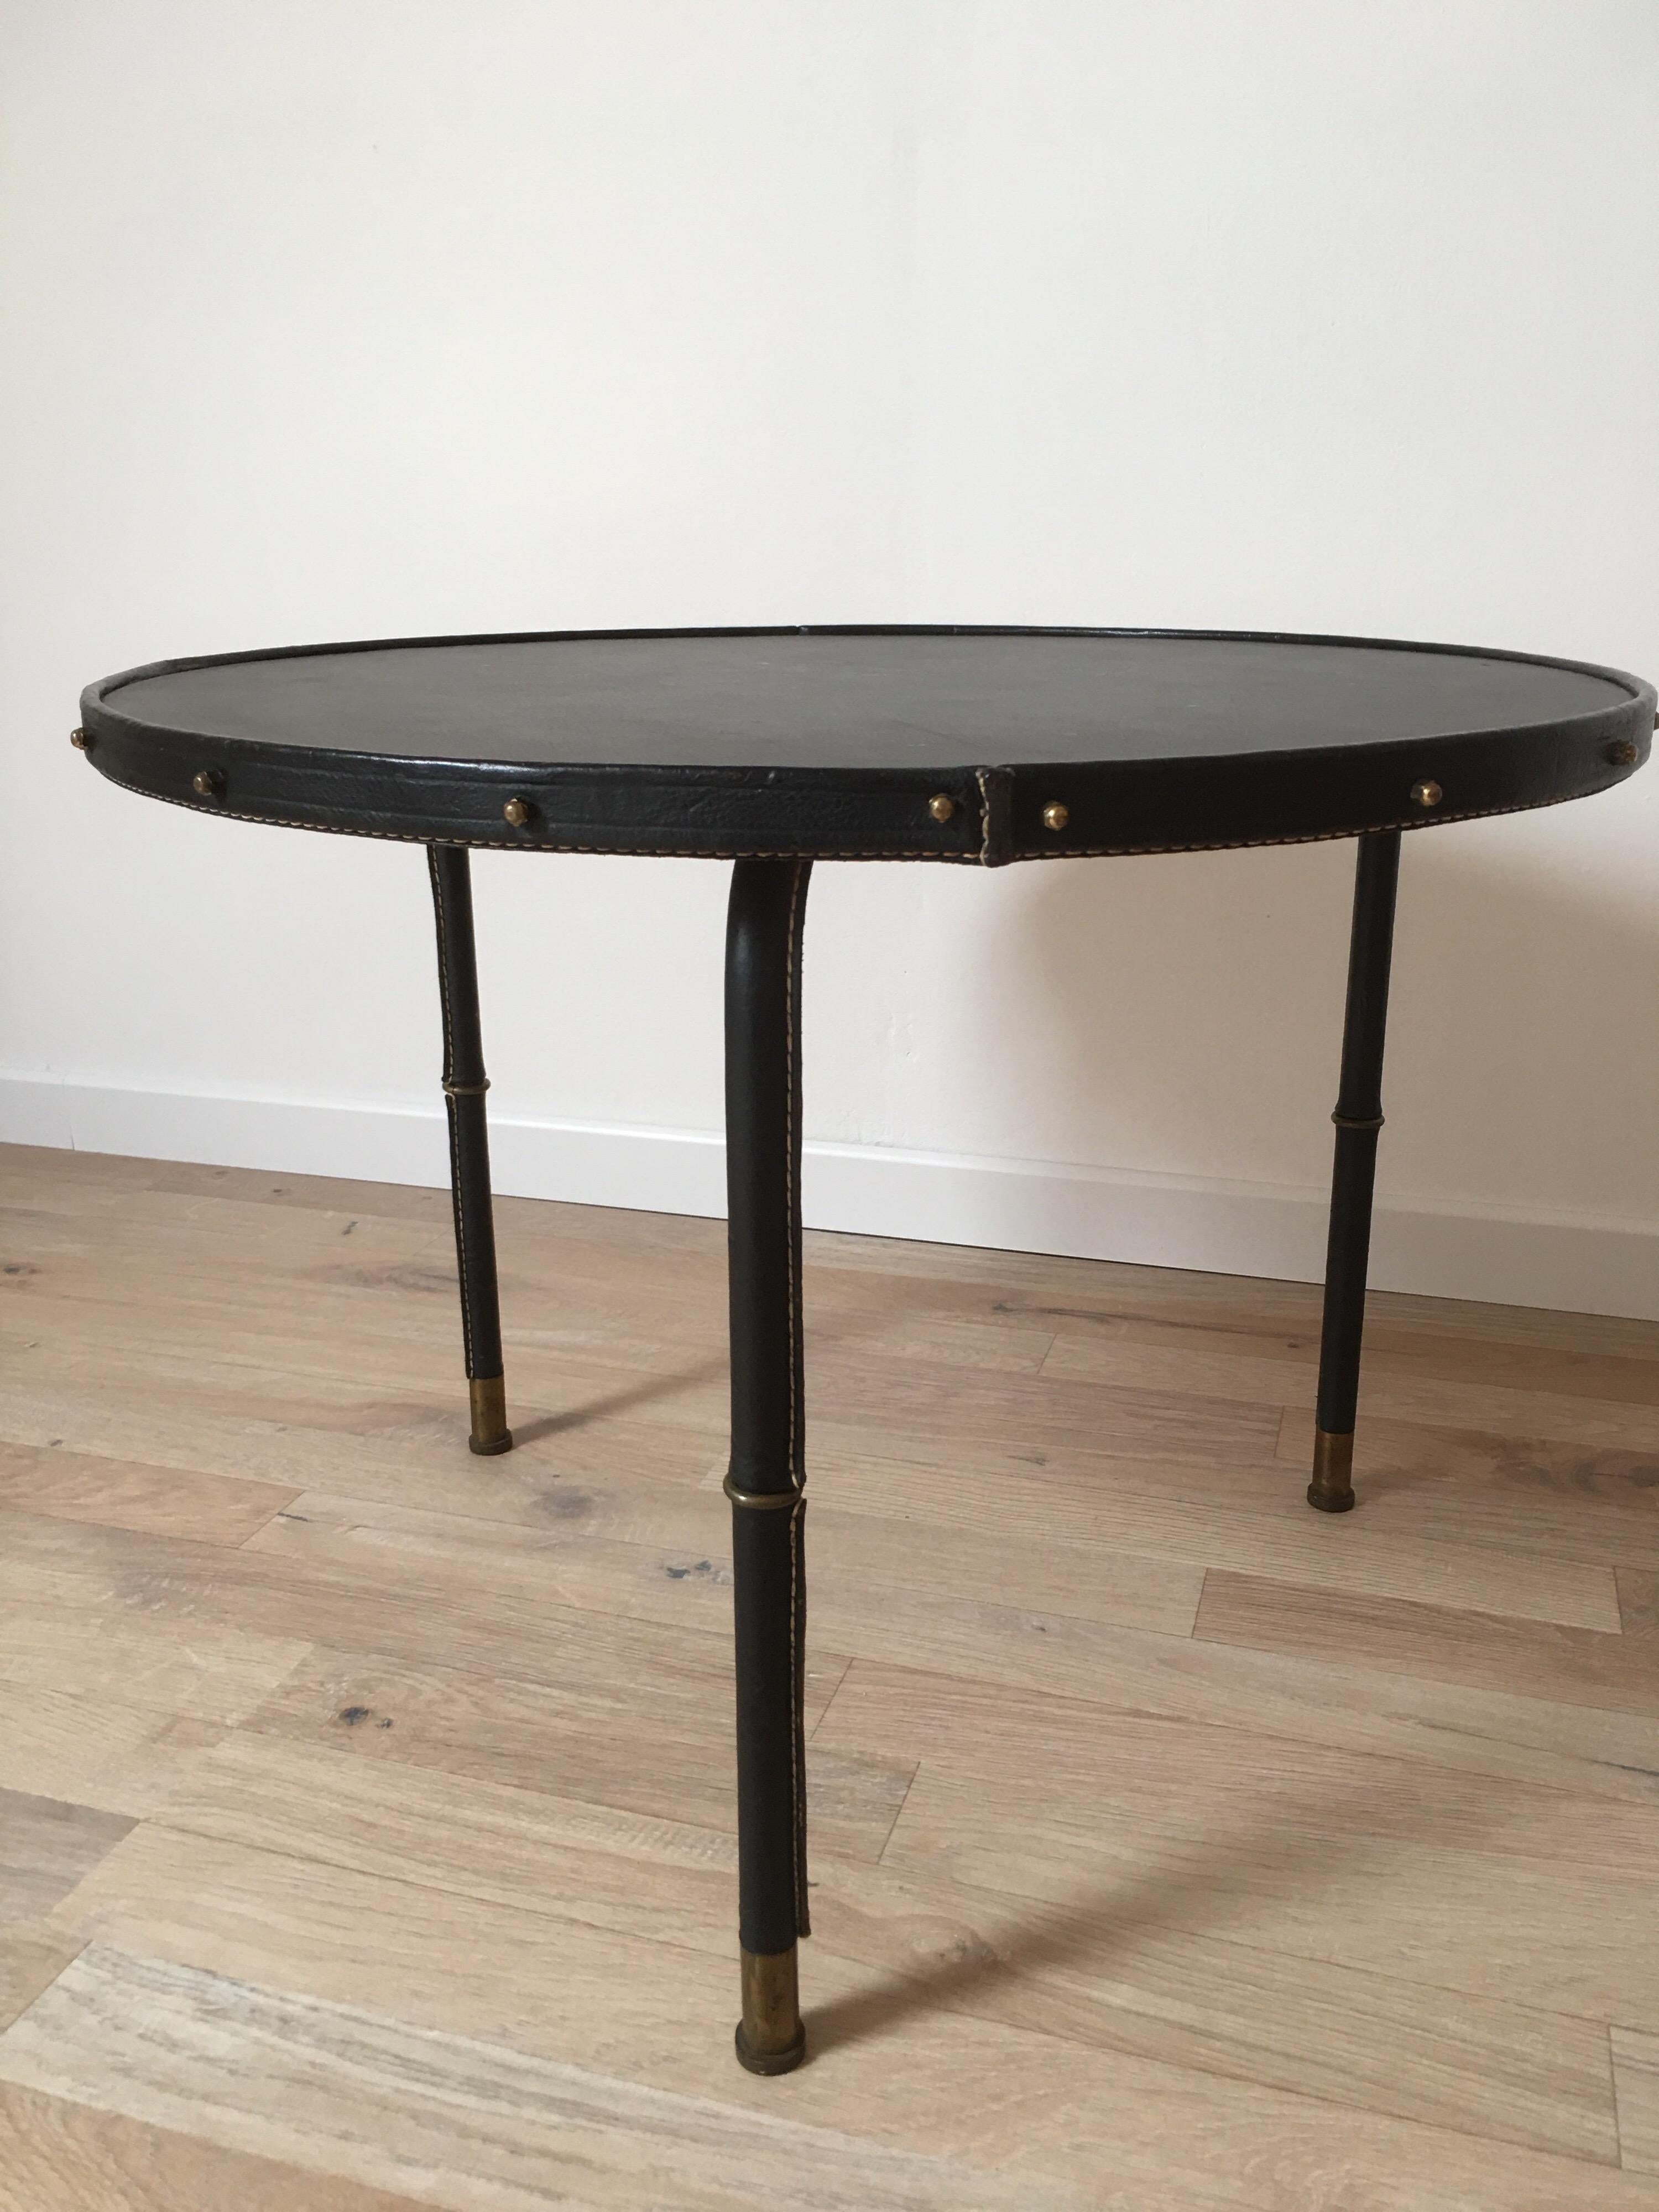 Black stitched leather low table attributed to Jacques Adnet, designed in the 1950s.
The round top is based on 3 black leather bambou style legs ending in bronze clogs. The previous owner changed the leather of the tray 20 years ago.
The coffee